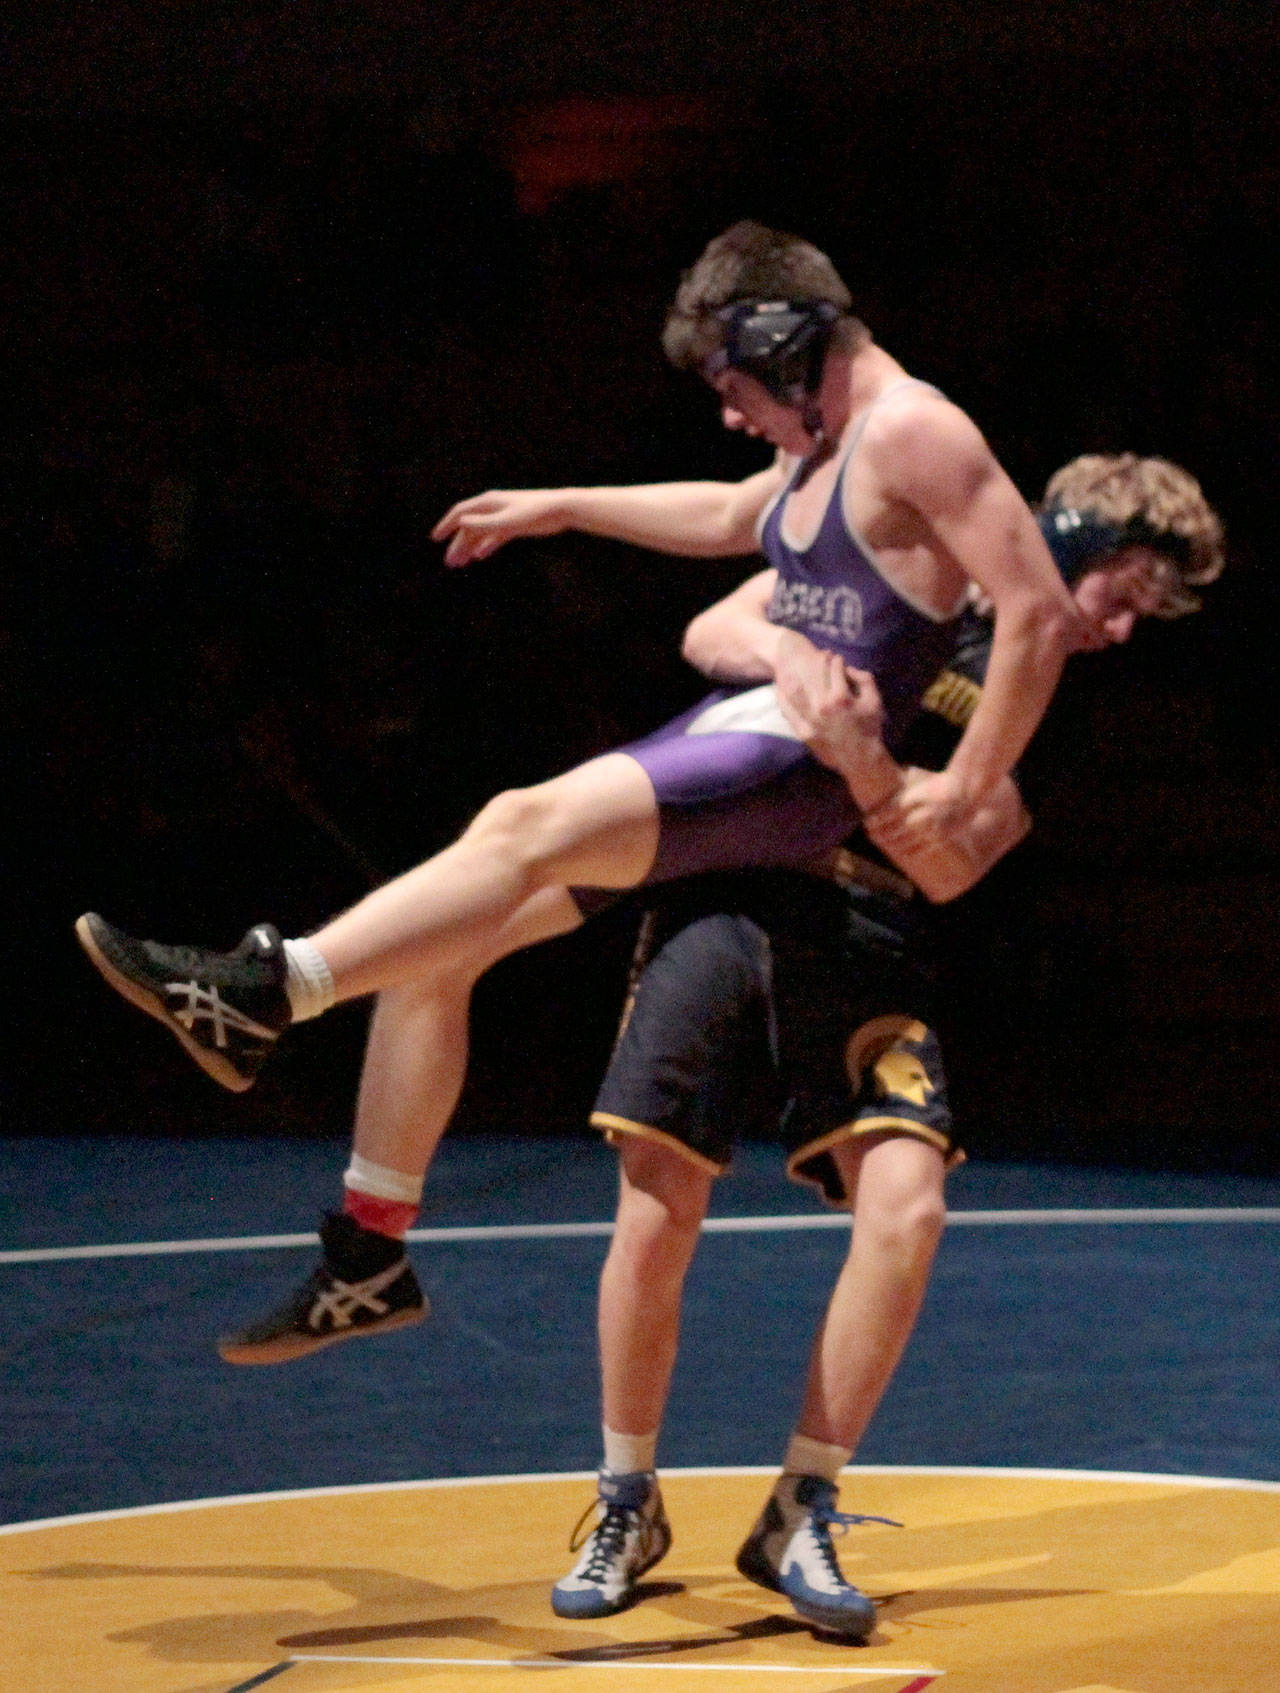 Luciano Marano | Bainbridge Island Review - BHS’ Ben Dunscombe scored a 3-0 decision win against Garfield’s Joseph Demonte in the 160-pound bracket during the first home wrestling match of the year.